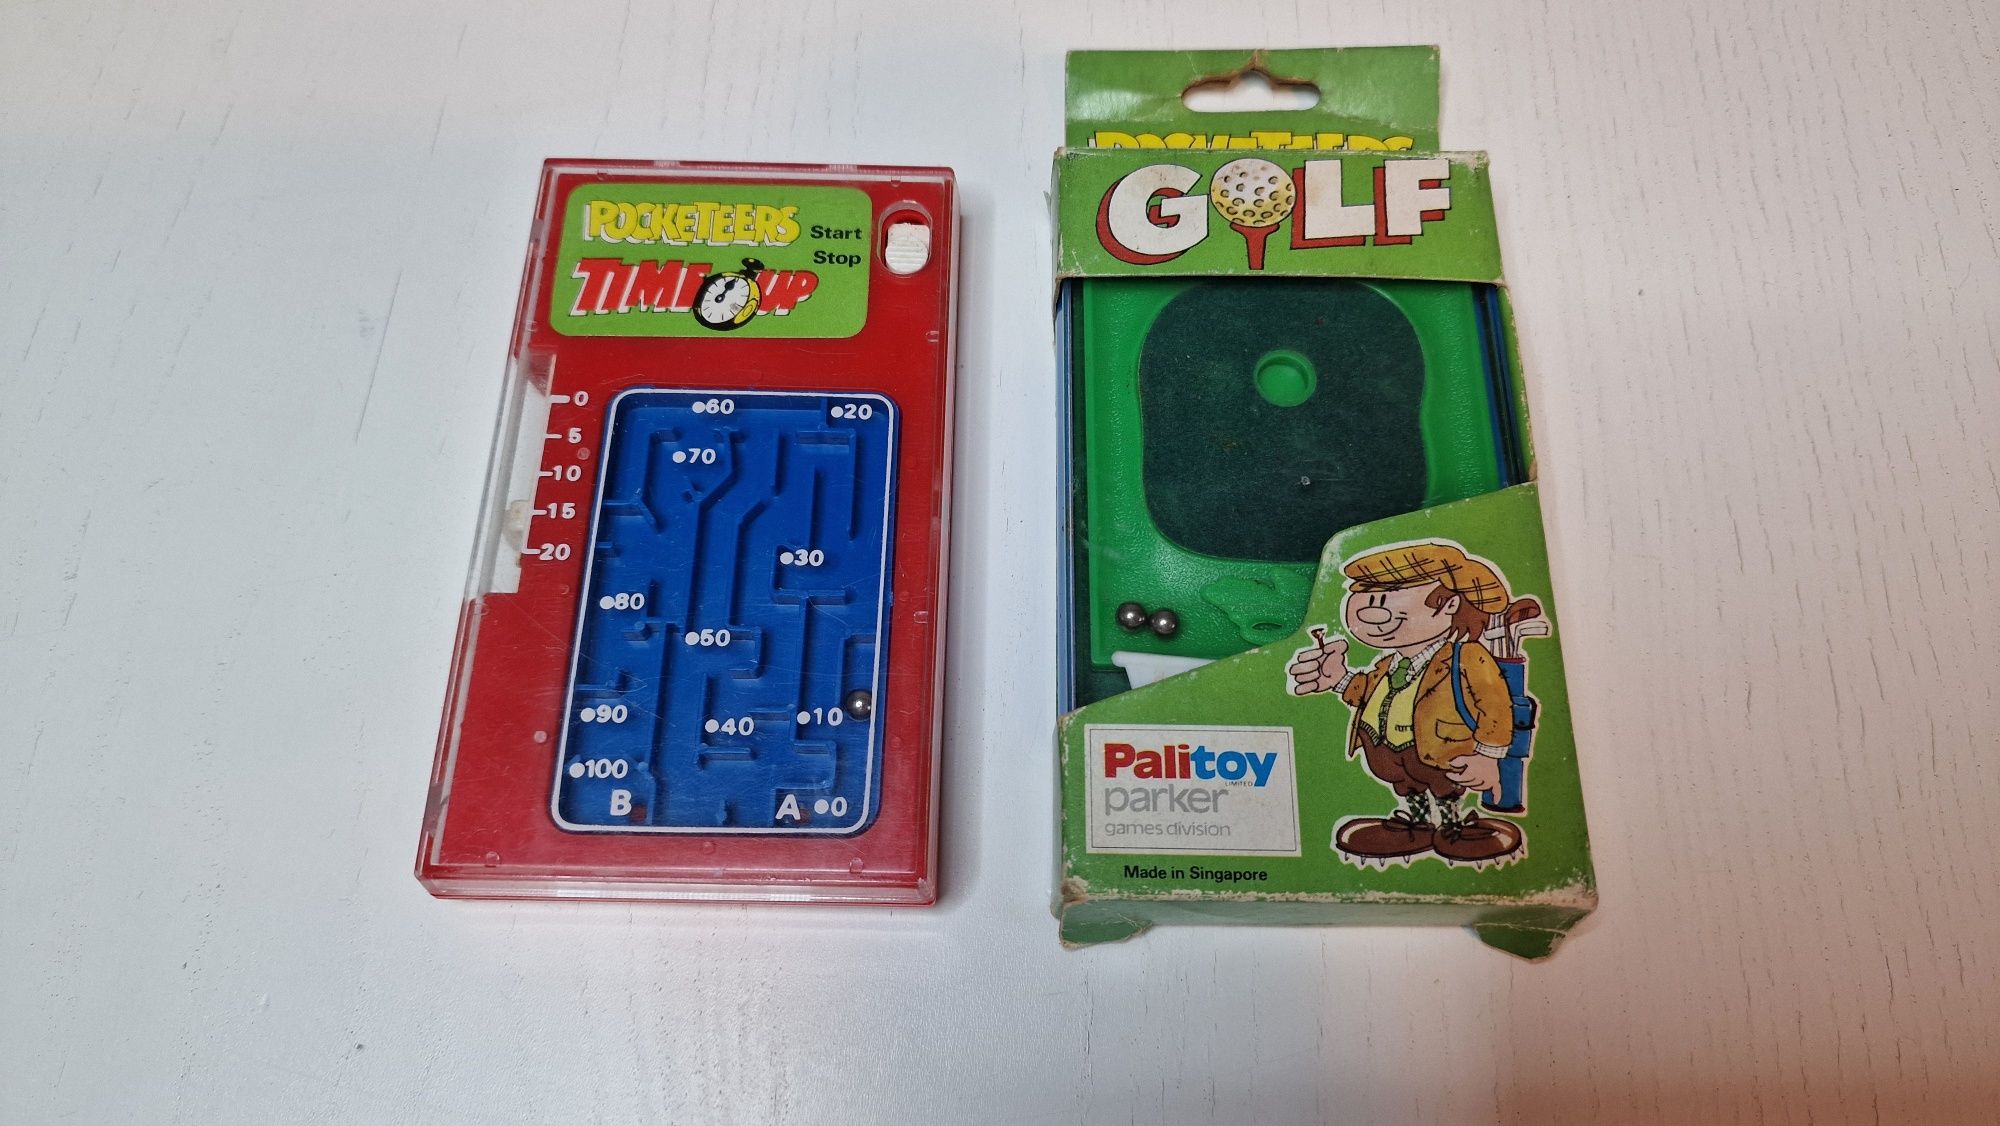 Pocketeers Golf i Time up Tomy 1975